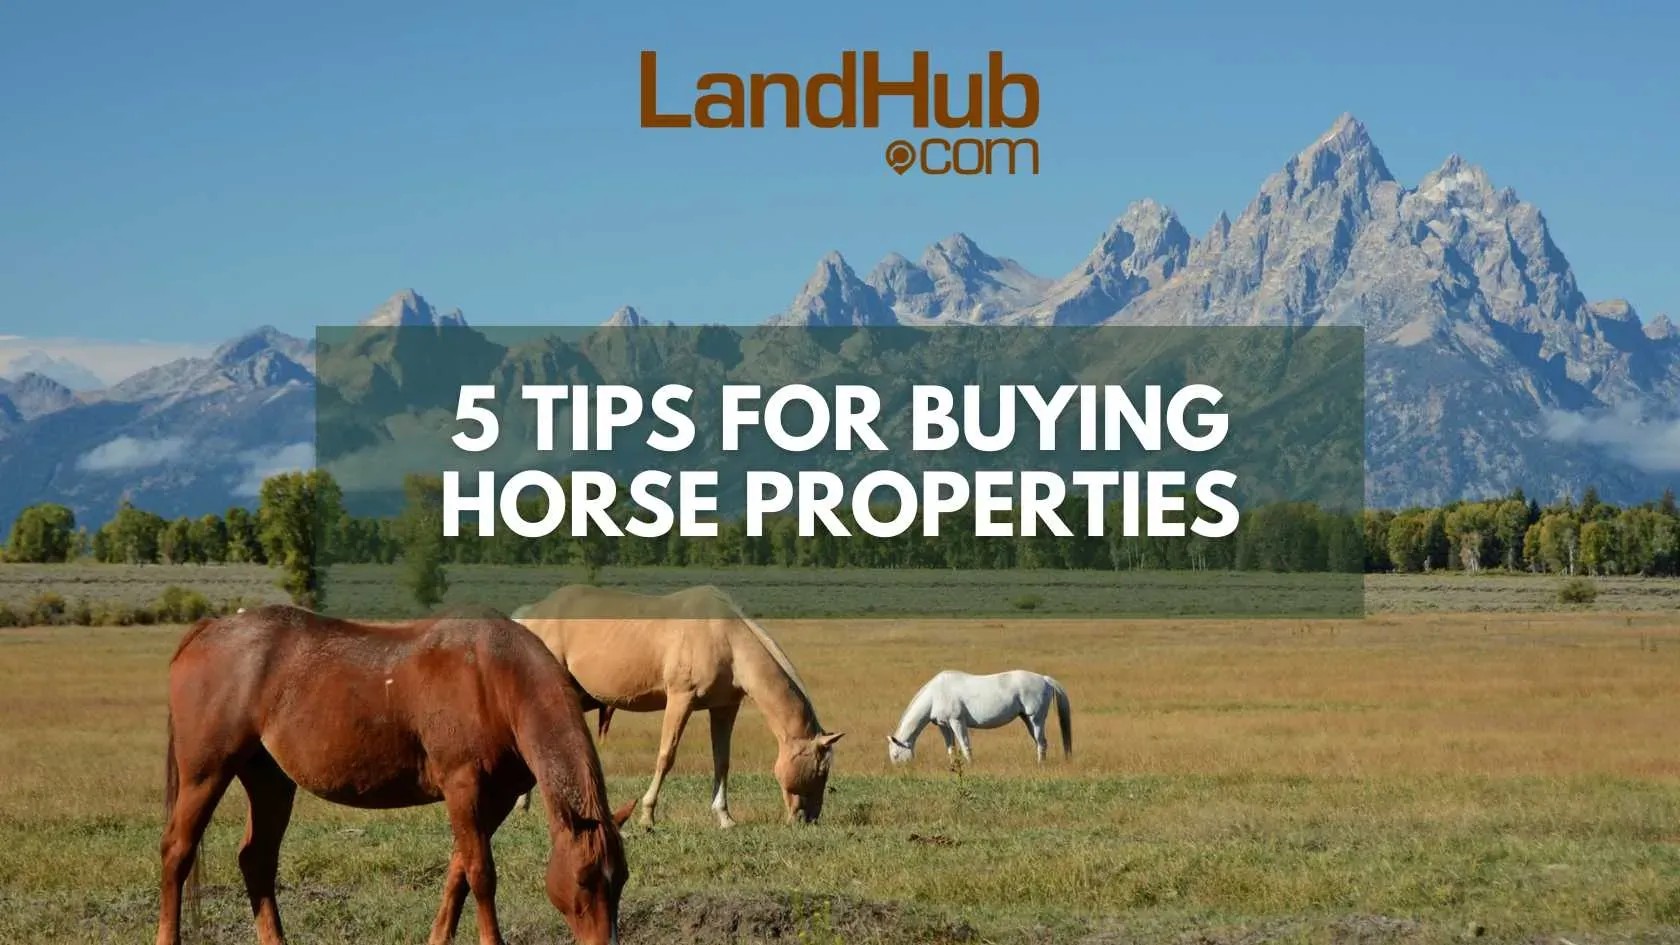 5 Tips for Buying Horse Properties